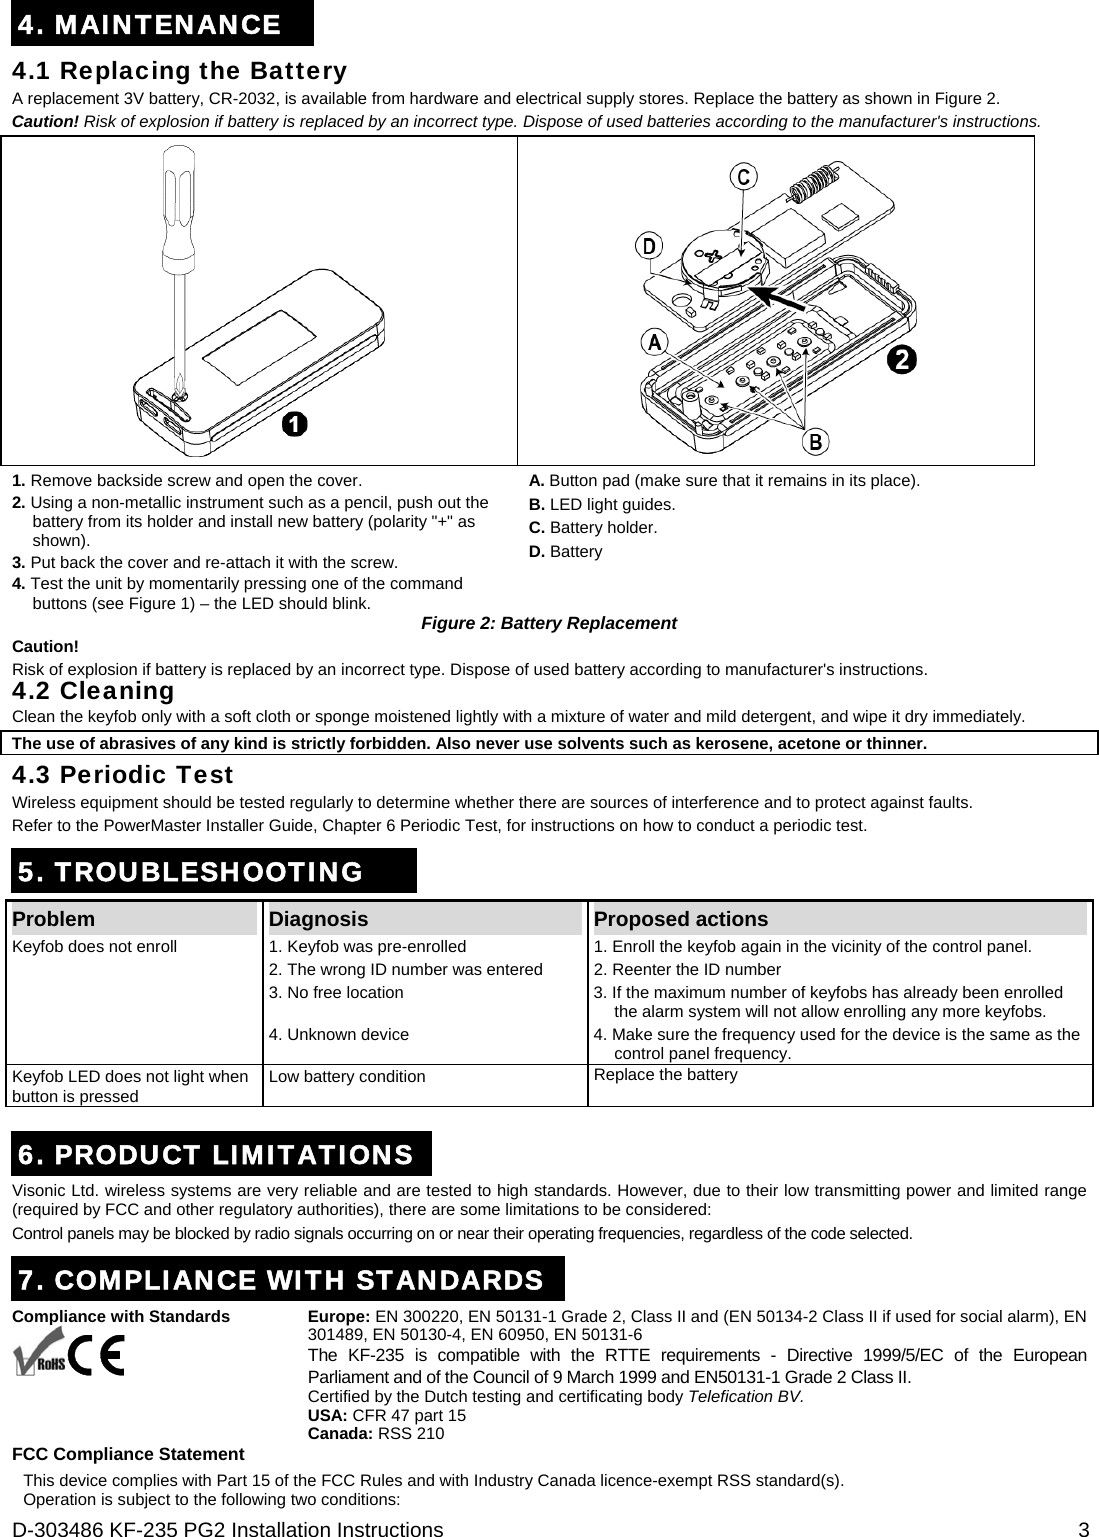  D-303486 KF-235 PG2 Installation Instructions  3 4. MAINTENANCE 4.1 Replacing the Battery A replacement 3V battery, CR-2032, is available from hardware and electrical supply stores. Replace the battery as shown in Figure 2. Caution! Risk of explosion if battery is replaced by an incorrect type. Dispose of used batteries according to the manufacturer&apos;s instructions.   1. Remove backside screw and open the cover. 2. Using a non-metallic instrument such as a pencil, push out the battery from its holder and install new battery (polarity &quot;+&quot; as shown). 3. Put back the cover and re-attach it with the screw.  4. Test the unit by momentarily pressing one of the command buttons (see Figure 1) – the LED should blink. A. Button pad (make sure that it remains in its place). B. LED light guides. C. Battery holder. D. Battery Figure 2: Battery Replacement Caution! Risk of explosion if battery is replaced by an incorrect type. Dispose of used battery according to manufacturer&apos;s instructions. 4.2 Cleaning Clean the keyfob only with a soft cloth or sponge moistened lightly with a mixture of water and mild detergent, and wipe it dry immediately. The use of abrasives of any kind is strictly forbidden. Also never use solvents such as kerosene, acetone or thinner. 4.3 Periodic Test Wireless equipment should be tested regularly to determine whether there are sources of interference and to protect against faults. Refer to the PowerMaster Installer Guide, Chapter 6 Periodic Test, for instructions on how to conduct a periodic test. 5. TROUBLESHOOTING Problem   Diagnosis  Proposed actions 1. Keyfob was pre-enrolled  1. Enroll the keyfob again in the vicinity of the control panel.  2. The wrong ID number was entered  2. Reenter the ID number 3. No free location  3. If the maximum number of keyfobs has already been enrolled the alarm system will not allow enrolling any more keyfobs. Keyfob does not enroll 4. Unknown device  4. Make sure the frequency used for the device is the same as the control panel frequency. Keyfob LED does not light when button is pressed Low battery condition  Replace the battery  6. PRODUCT LIMITATIONS Visonic Ltd. wireless systems are very reliable and are tested to high standards. However, due to their low transmitting power and limited range (required by FCC and other regulatory authorities), there are some limitations to be considered: Control panels may be blocked by radio signals occurring on or near their operating frequencies, regardless of the code selected. 7. COMPLIANCE WITH STANDARDS Compliance with Standards     Europe: EN 300220, EN 50131-1 Grade 2, Class II and (EN 50134-2 Class II if used for social alarm), EN 301489, EN 50130-4, EN 60950, EN 50131-6 The KF-235 is compatible with the RTTE requirements - Directive 1999/5/EC of the European Parliament and of the Council of 9 March 1999 and EN50131-1 Grade 2 Class II. Certified by the Dutch testing and certificating body Telefication BV. USA: CFR 47 part 15 Canada: RSS 210 FCC Compliance Statement This device complies with Part 15 of the FCC Rules and with Industry Canada licence-exempt RSS standard(s). Operation is subject to the following two conditions: 